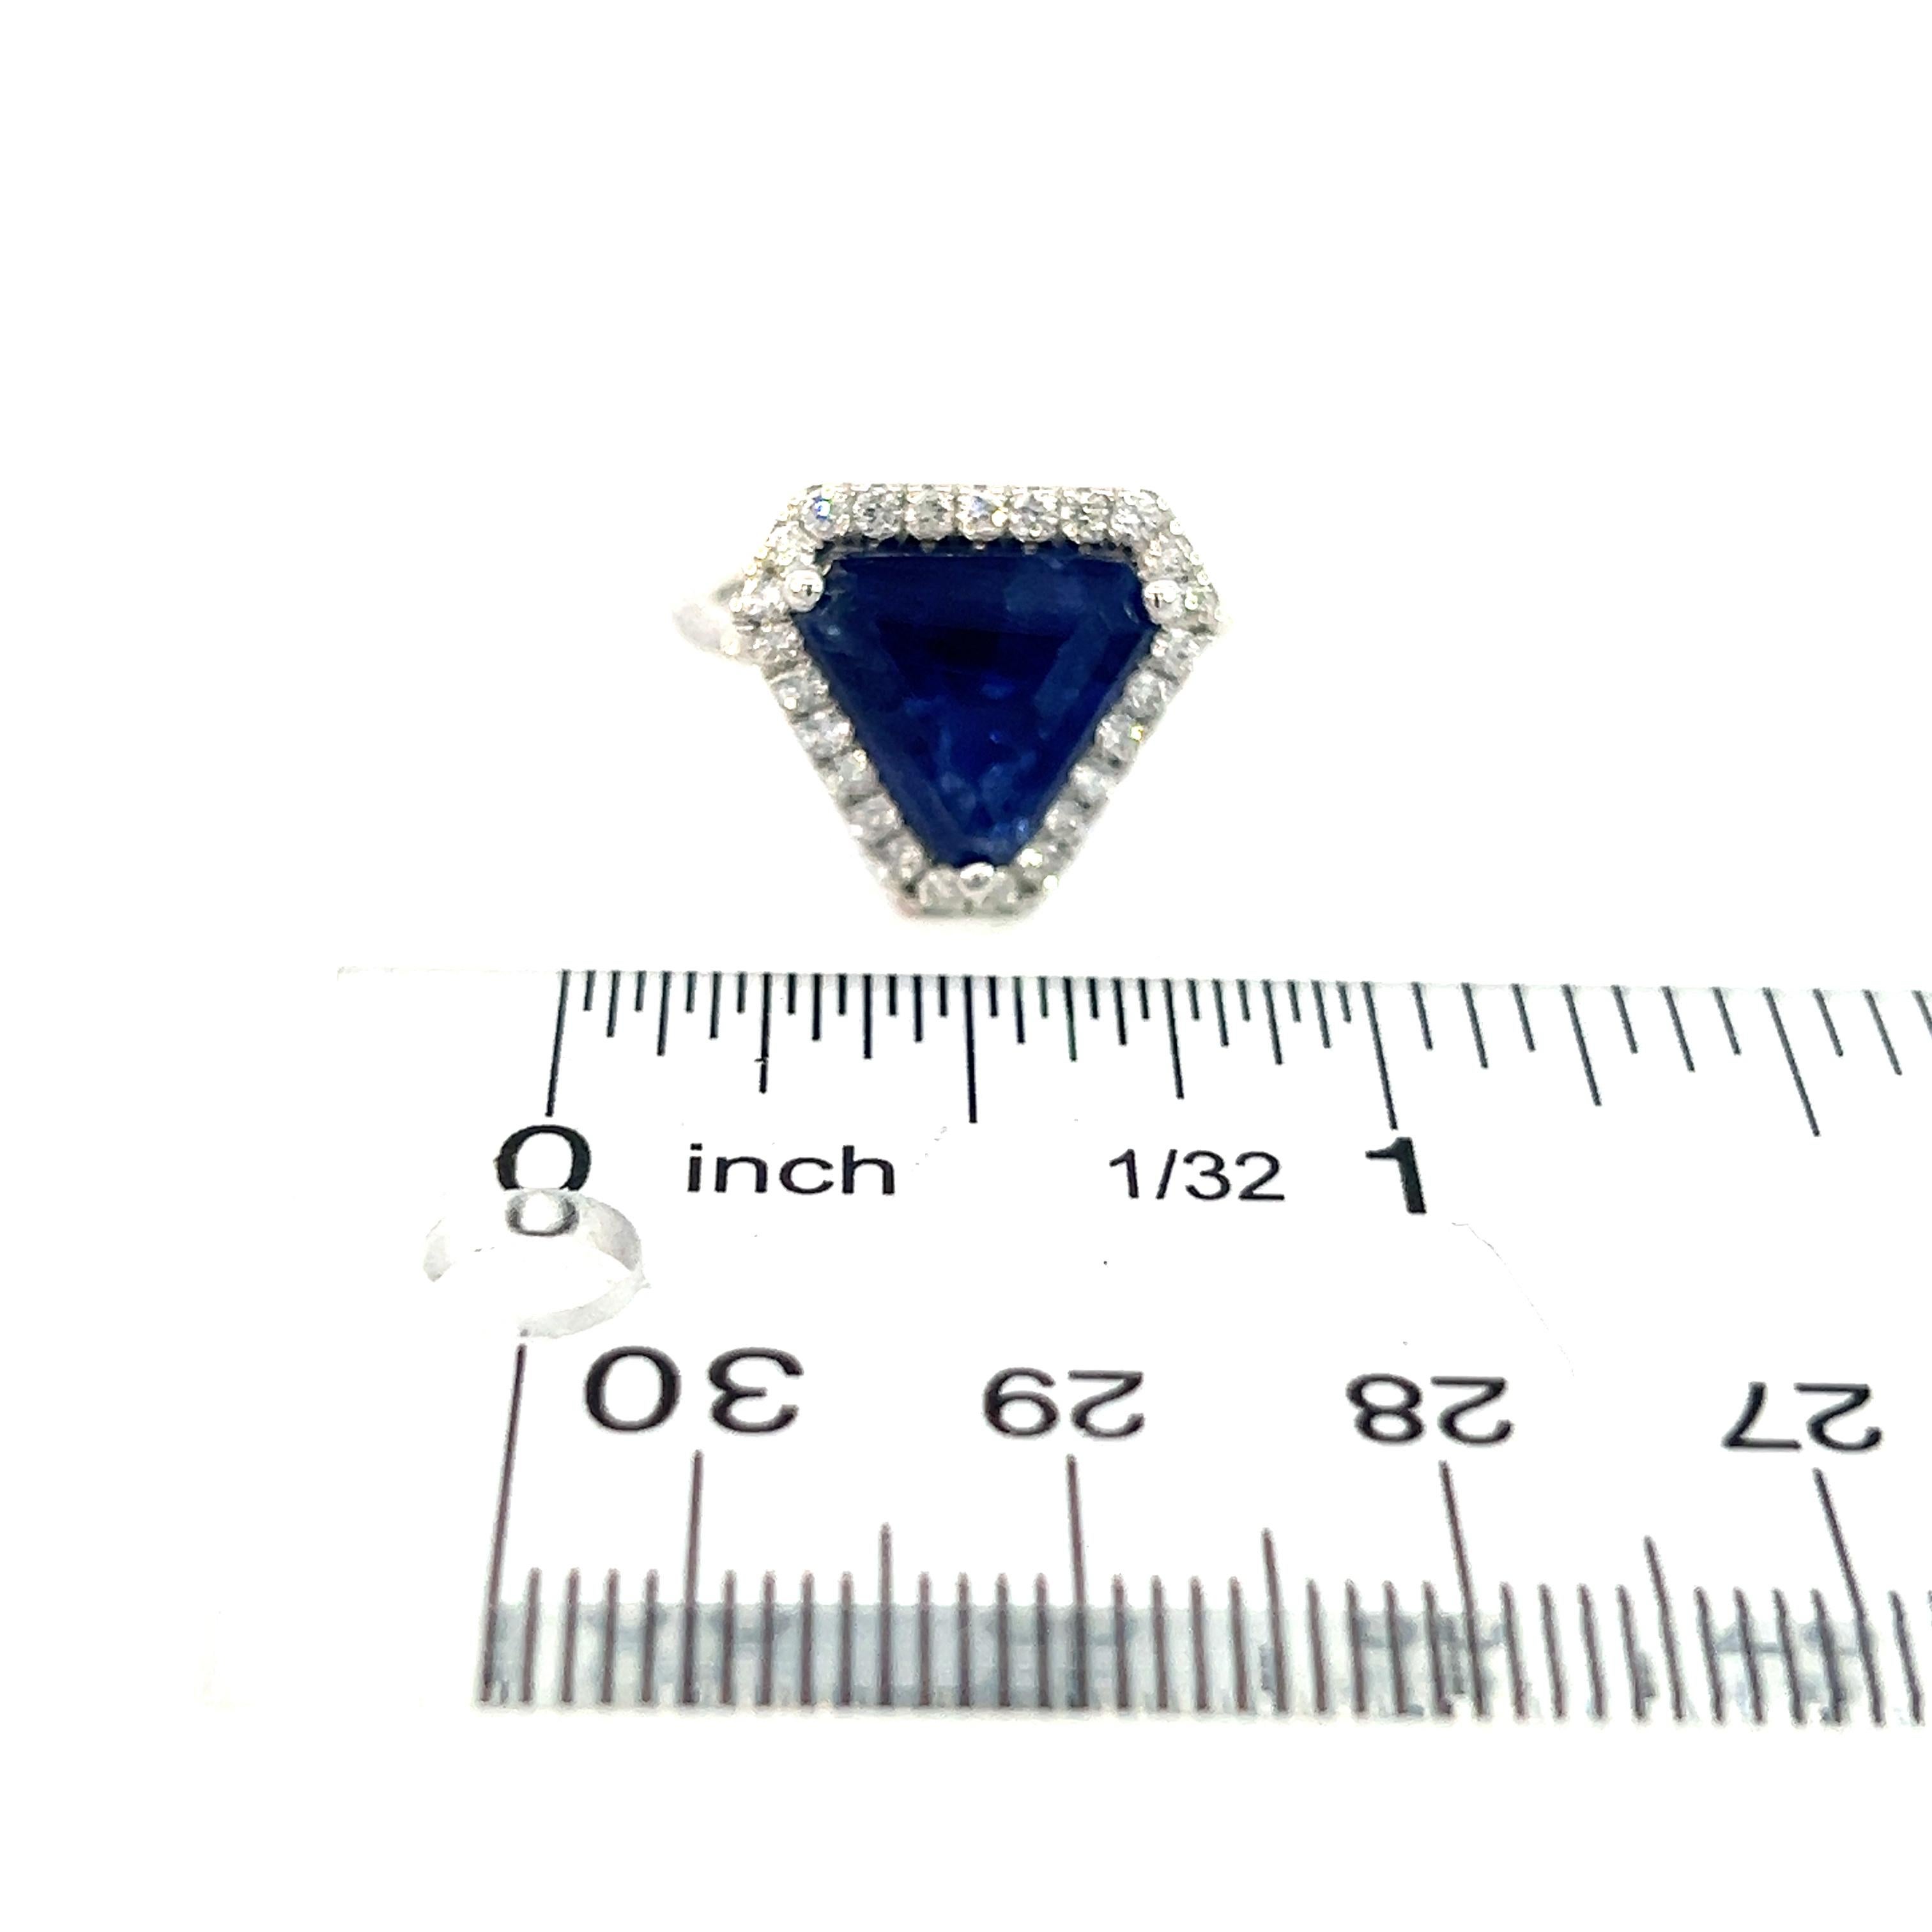 Natural Sapphire Diamond Ring 6.5 14k W Gold 5.84 TCW Certified For Sale 6